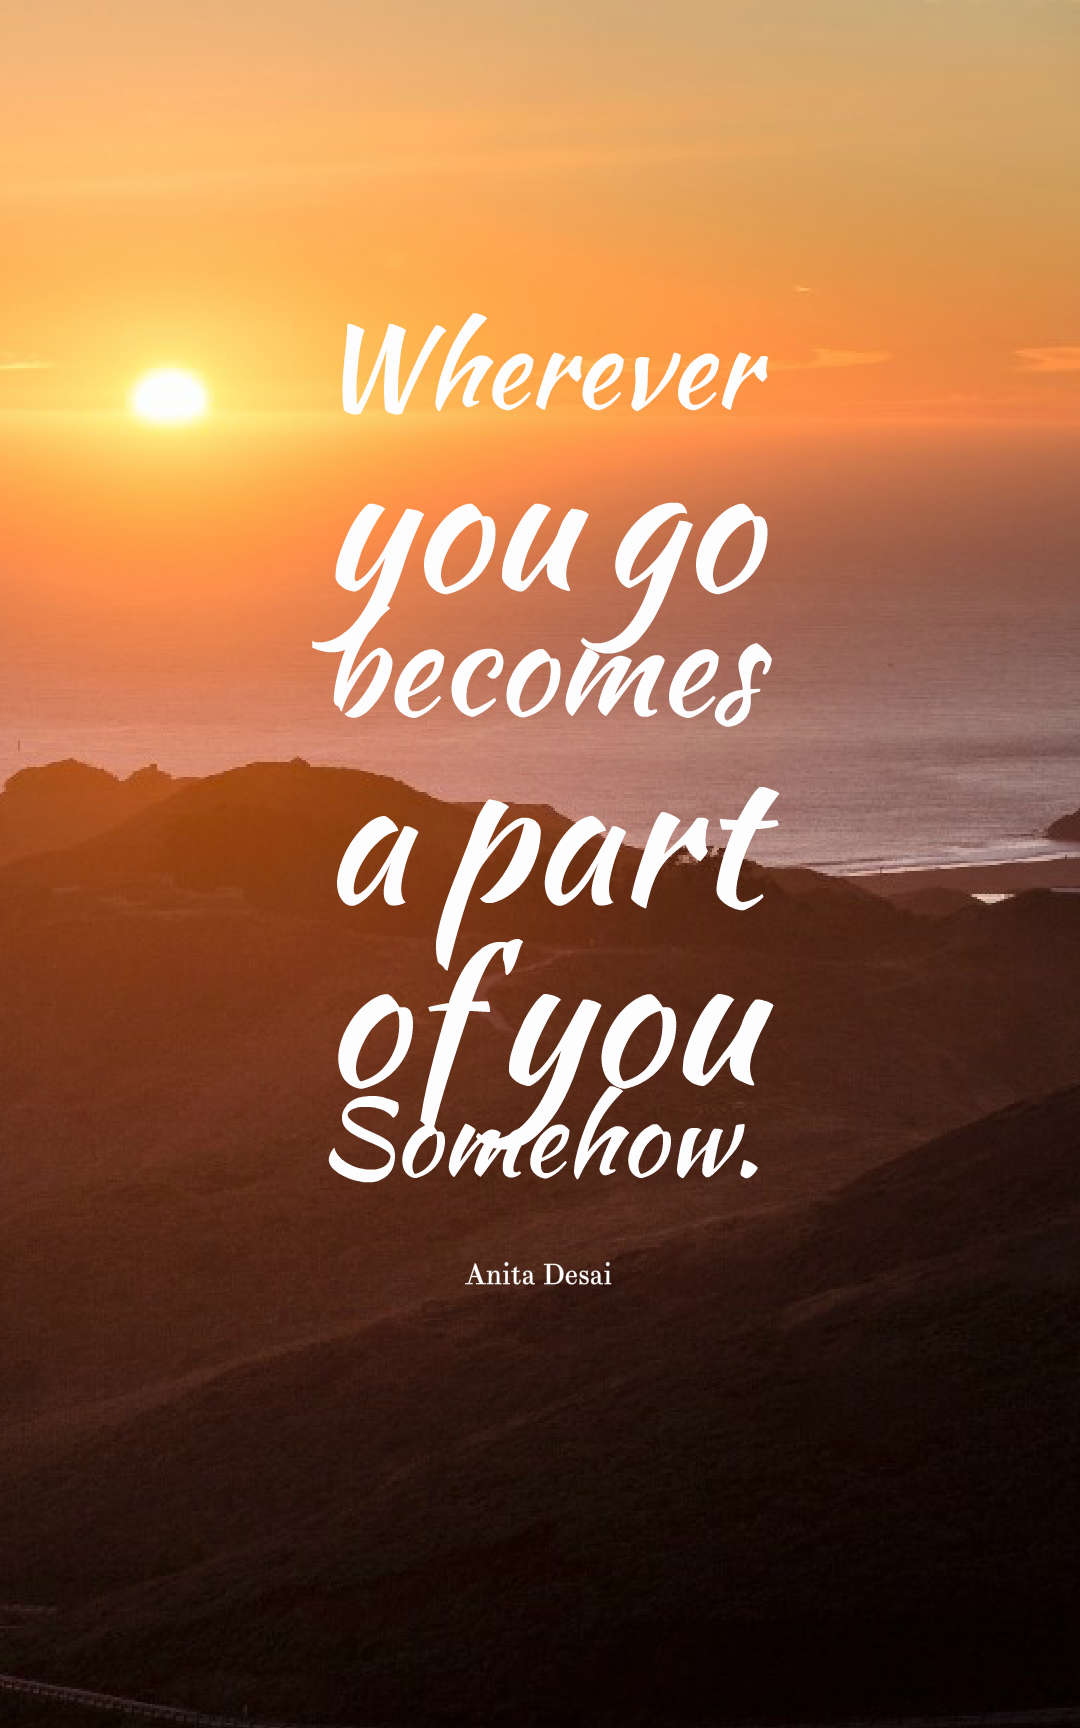 Wherever you go becomes a part of you somehow.